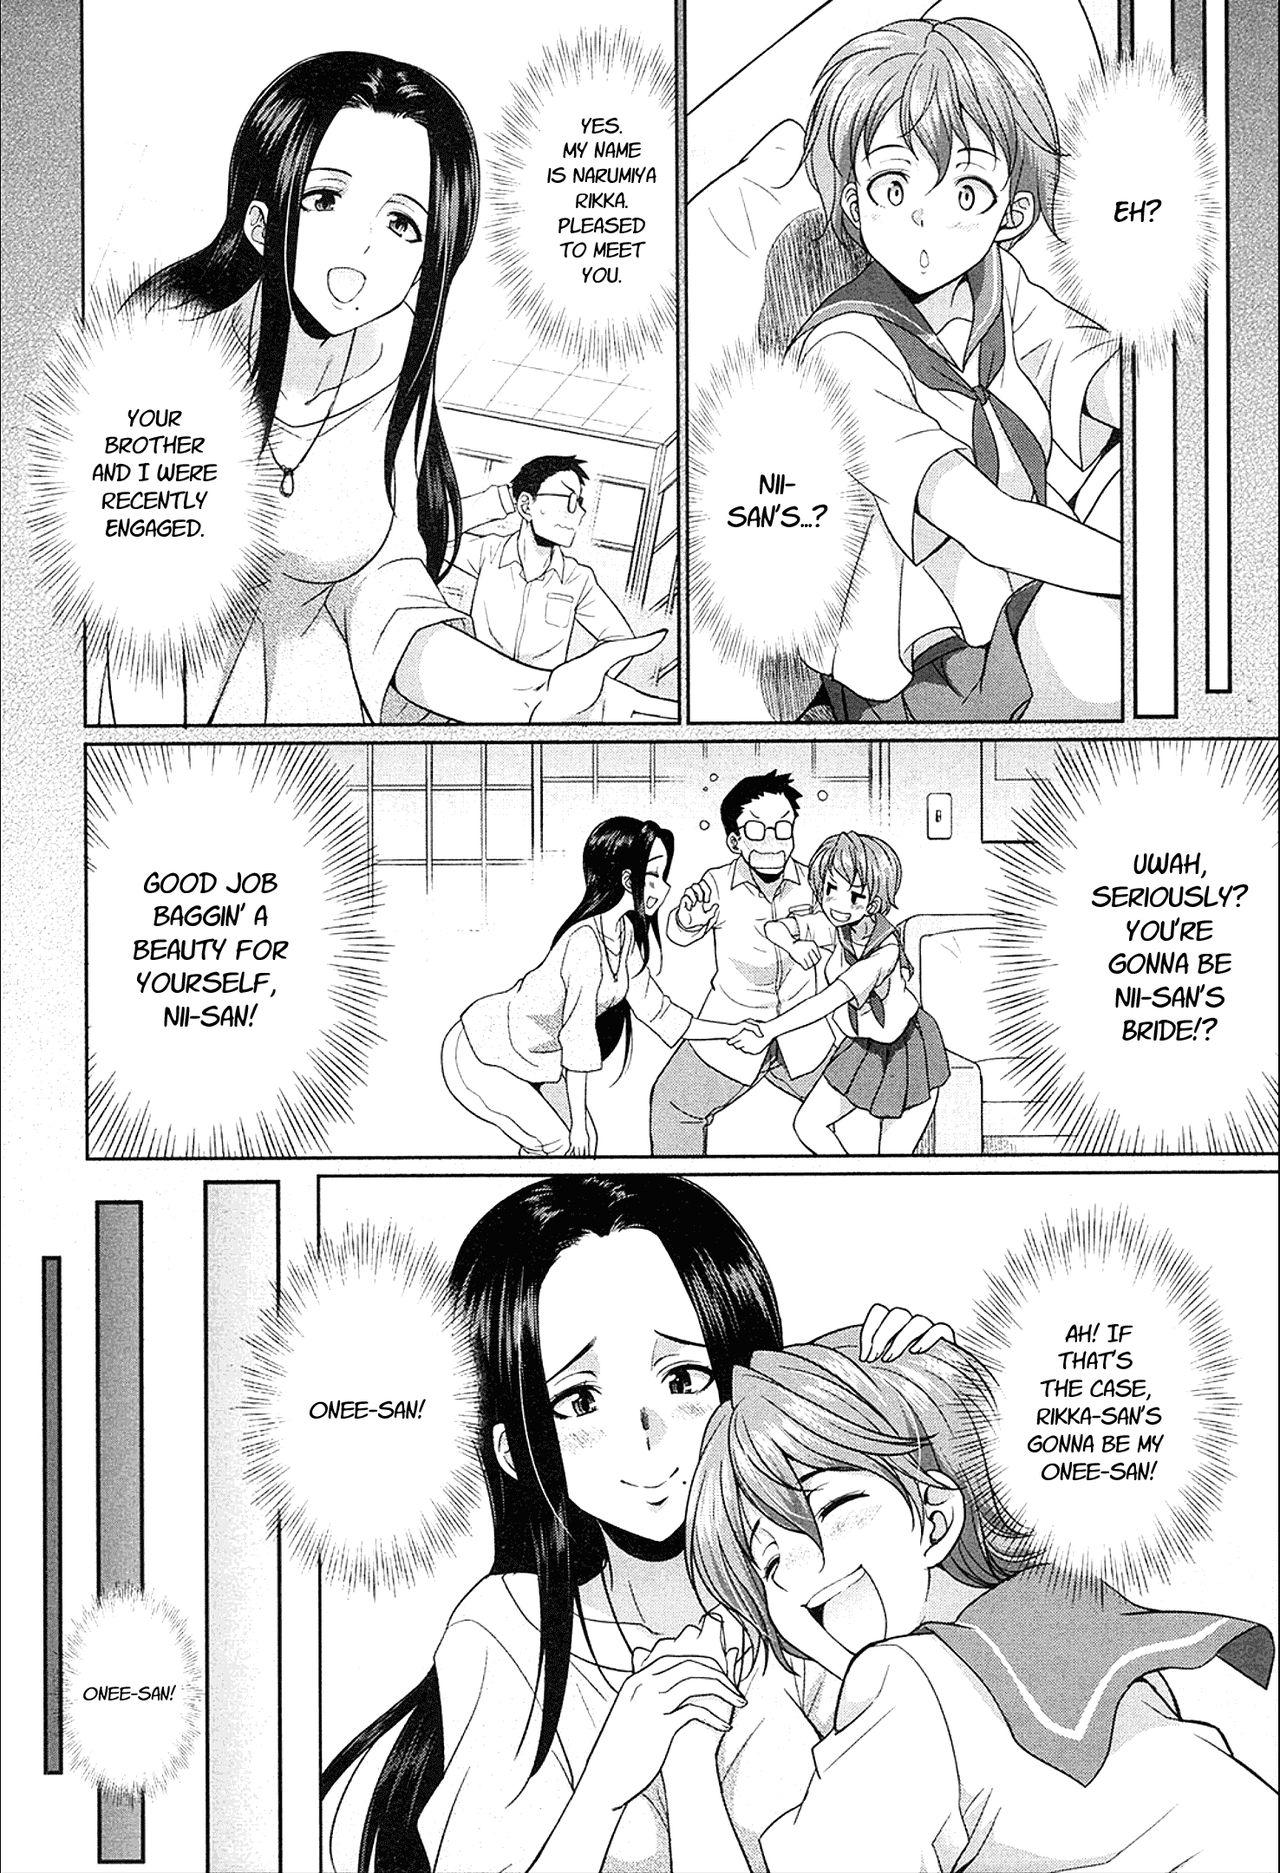 Asses Gishimai no Kankei The Relationship of the Sisters-in-Law Original Script Uncensored Coeds - Page 4